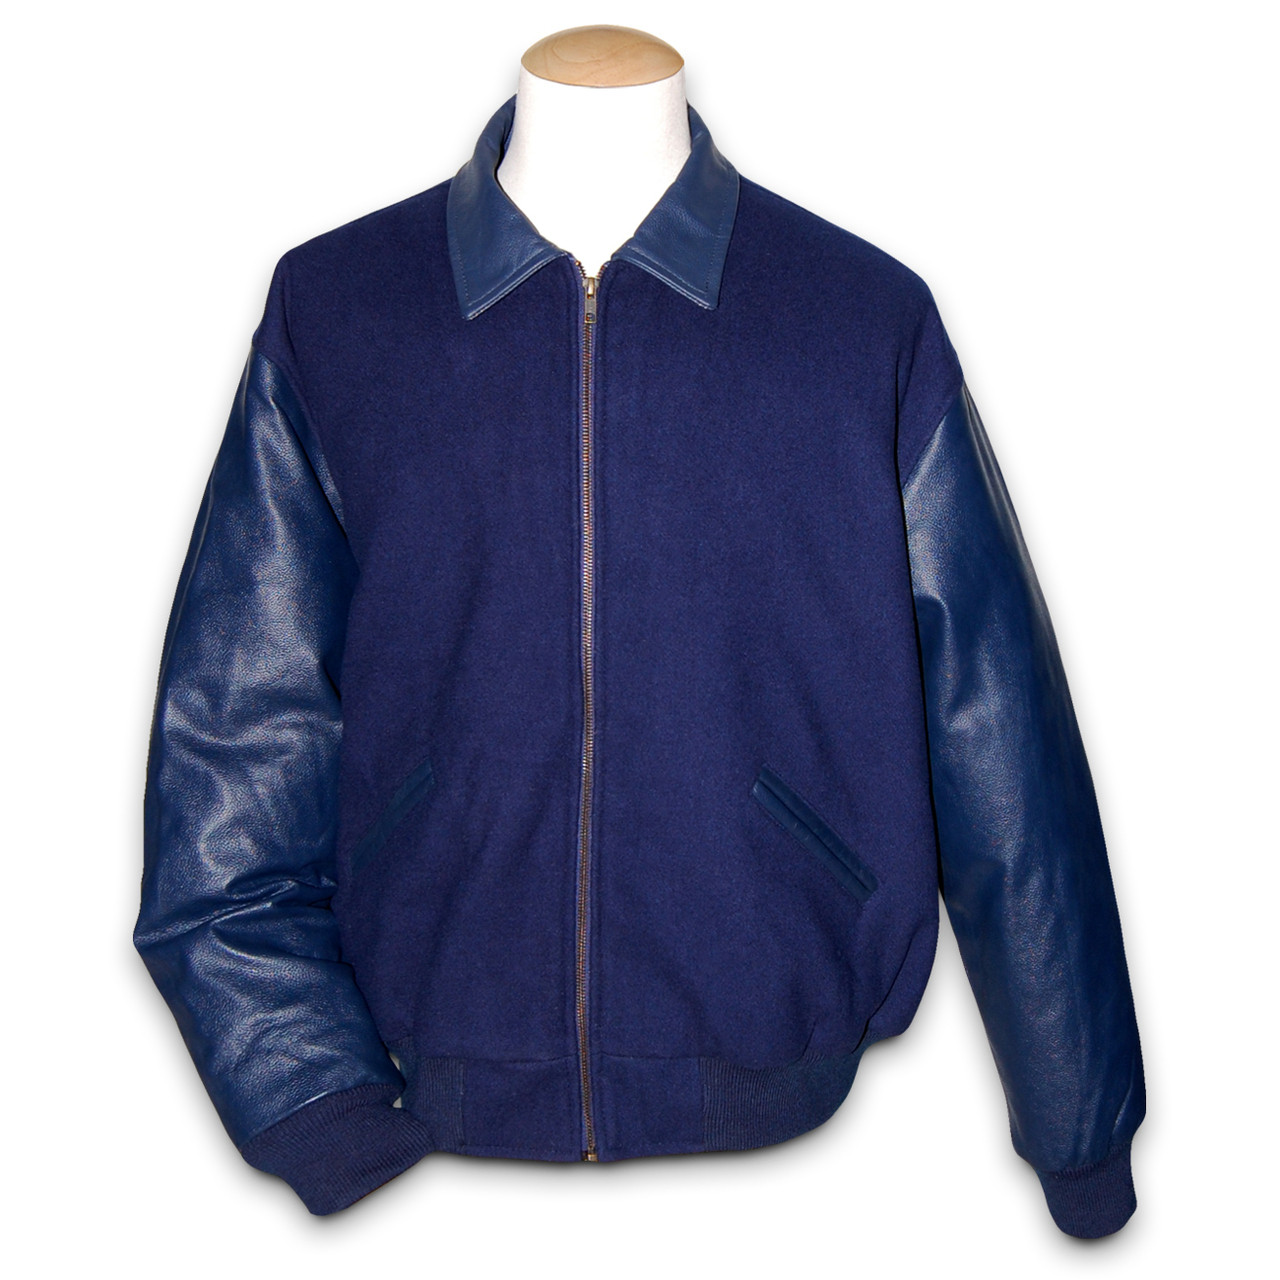 Men's Wool Navy Blue Varsity-Style Jacket with Black Leather Sleeves  *Limited Stock*